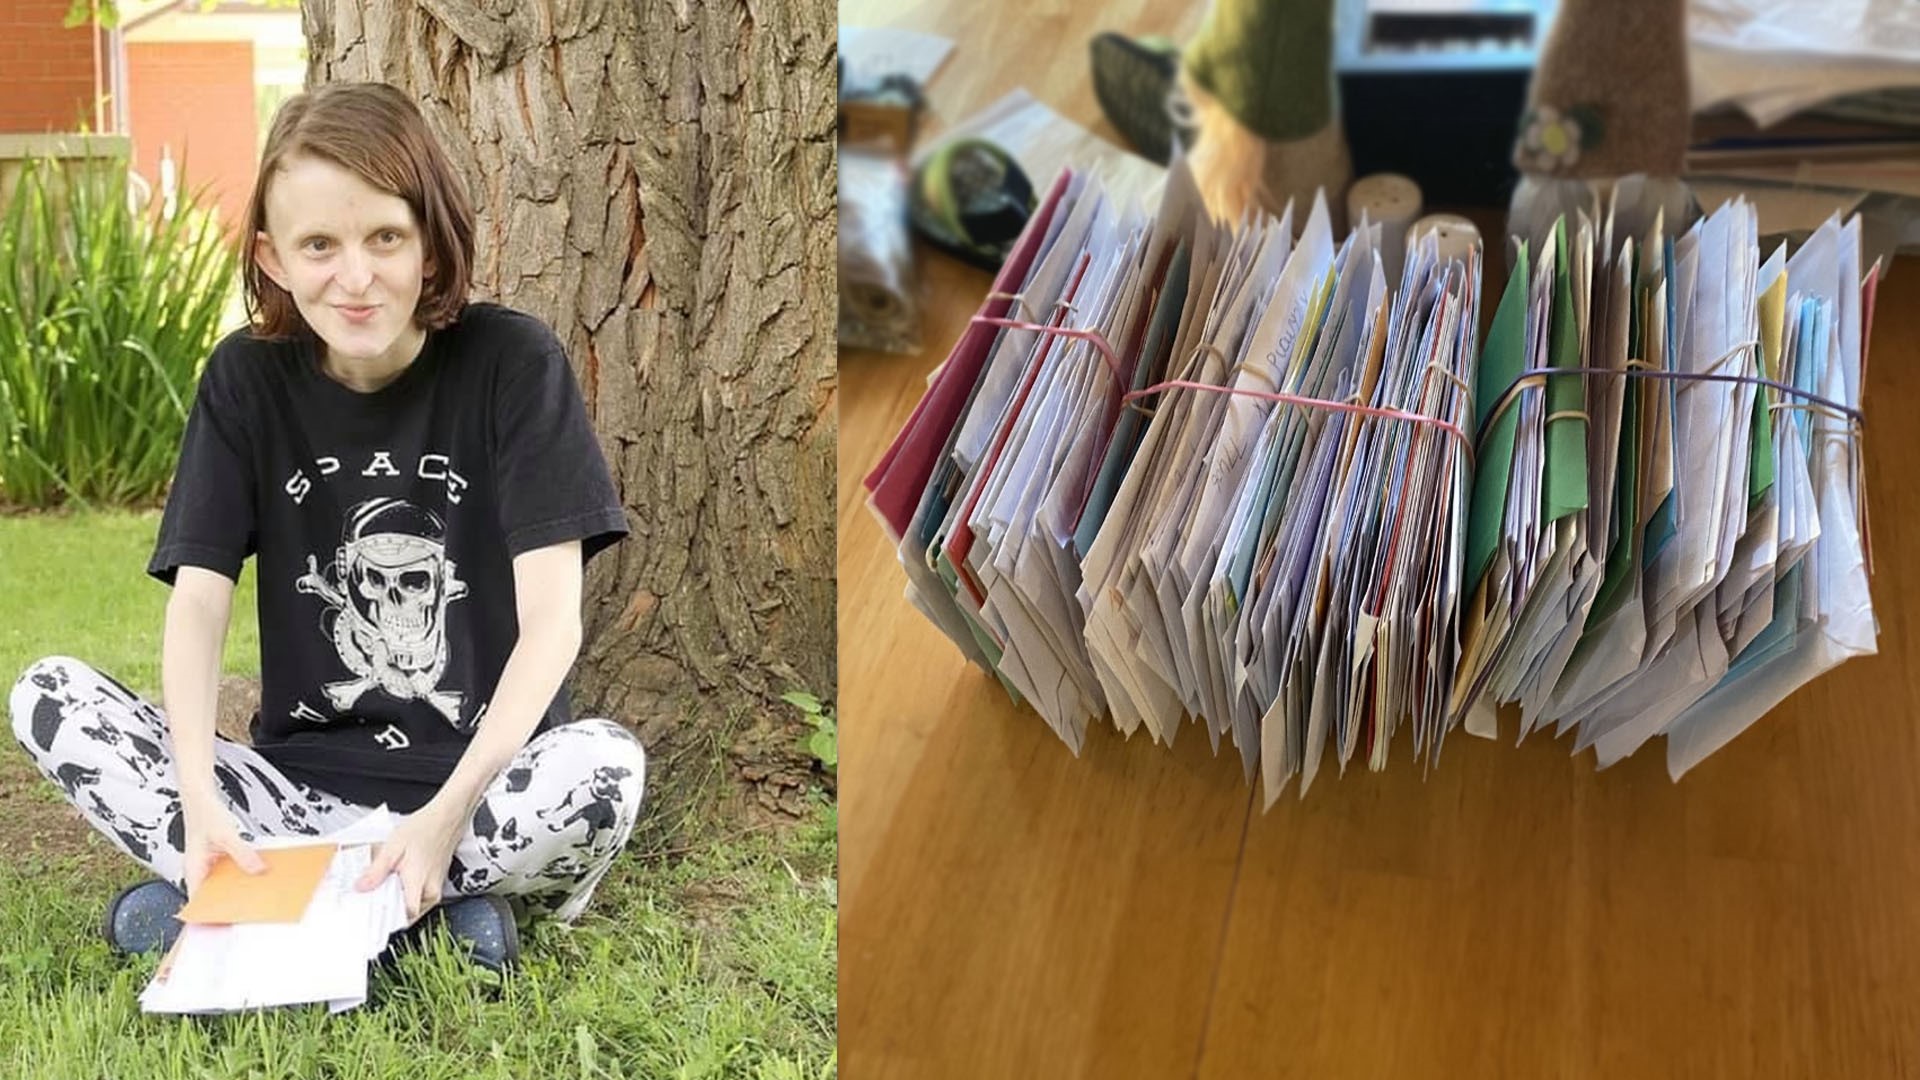 Despite her own adversities, one Arkansas woman is striving to make others happy by spreading kindness through handwritten letters.